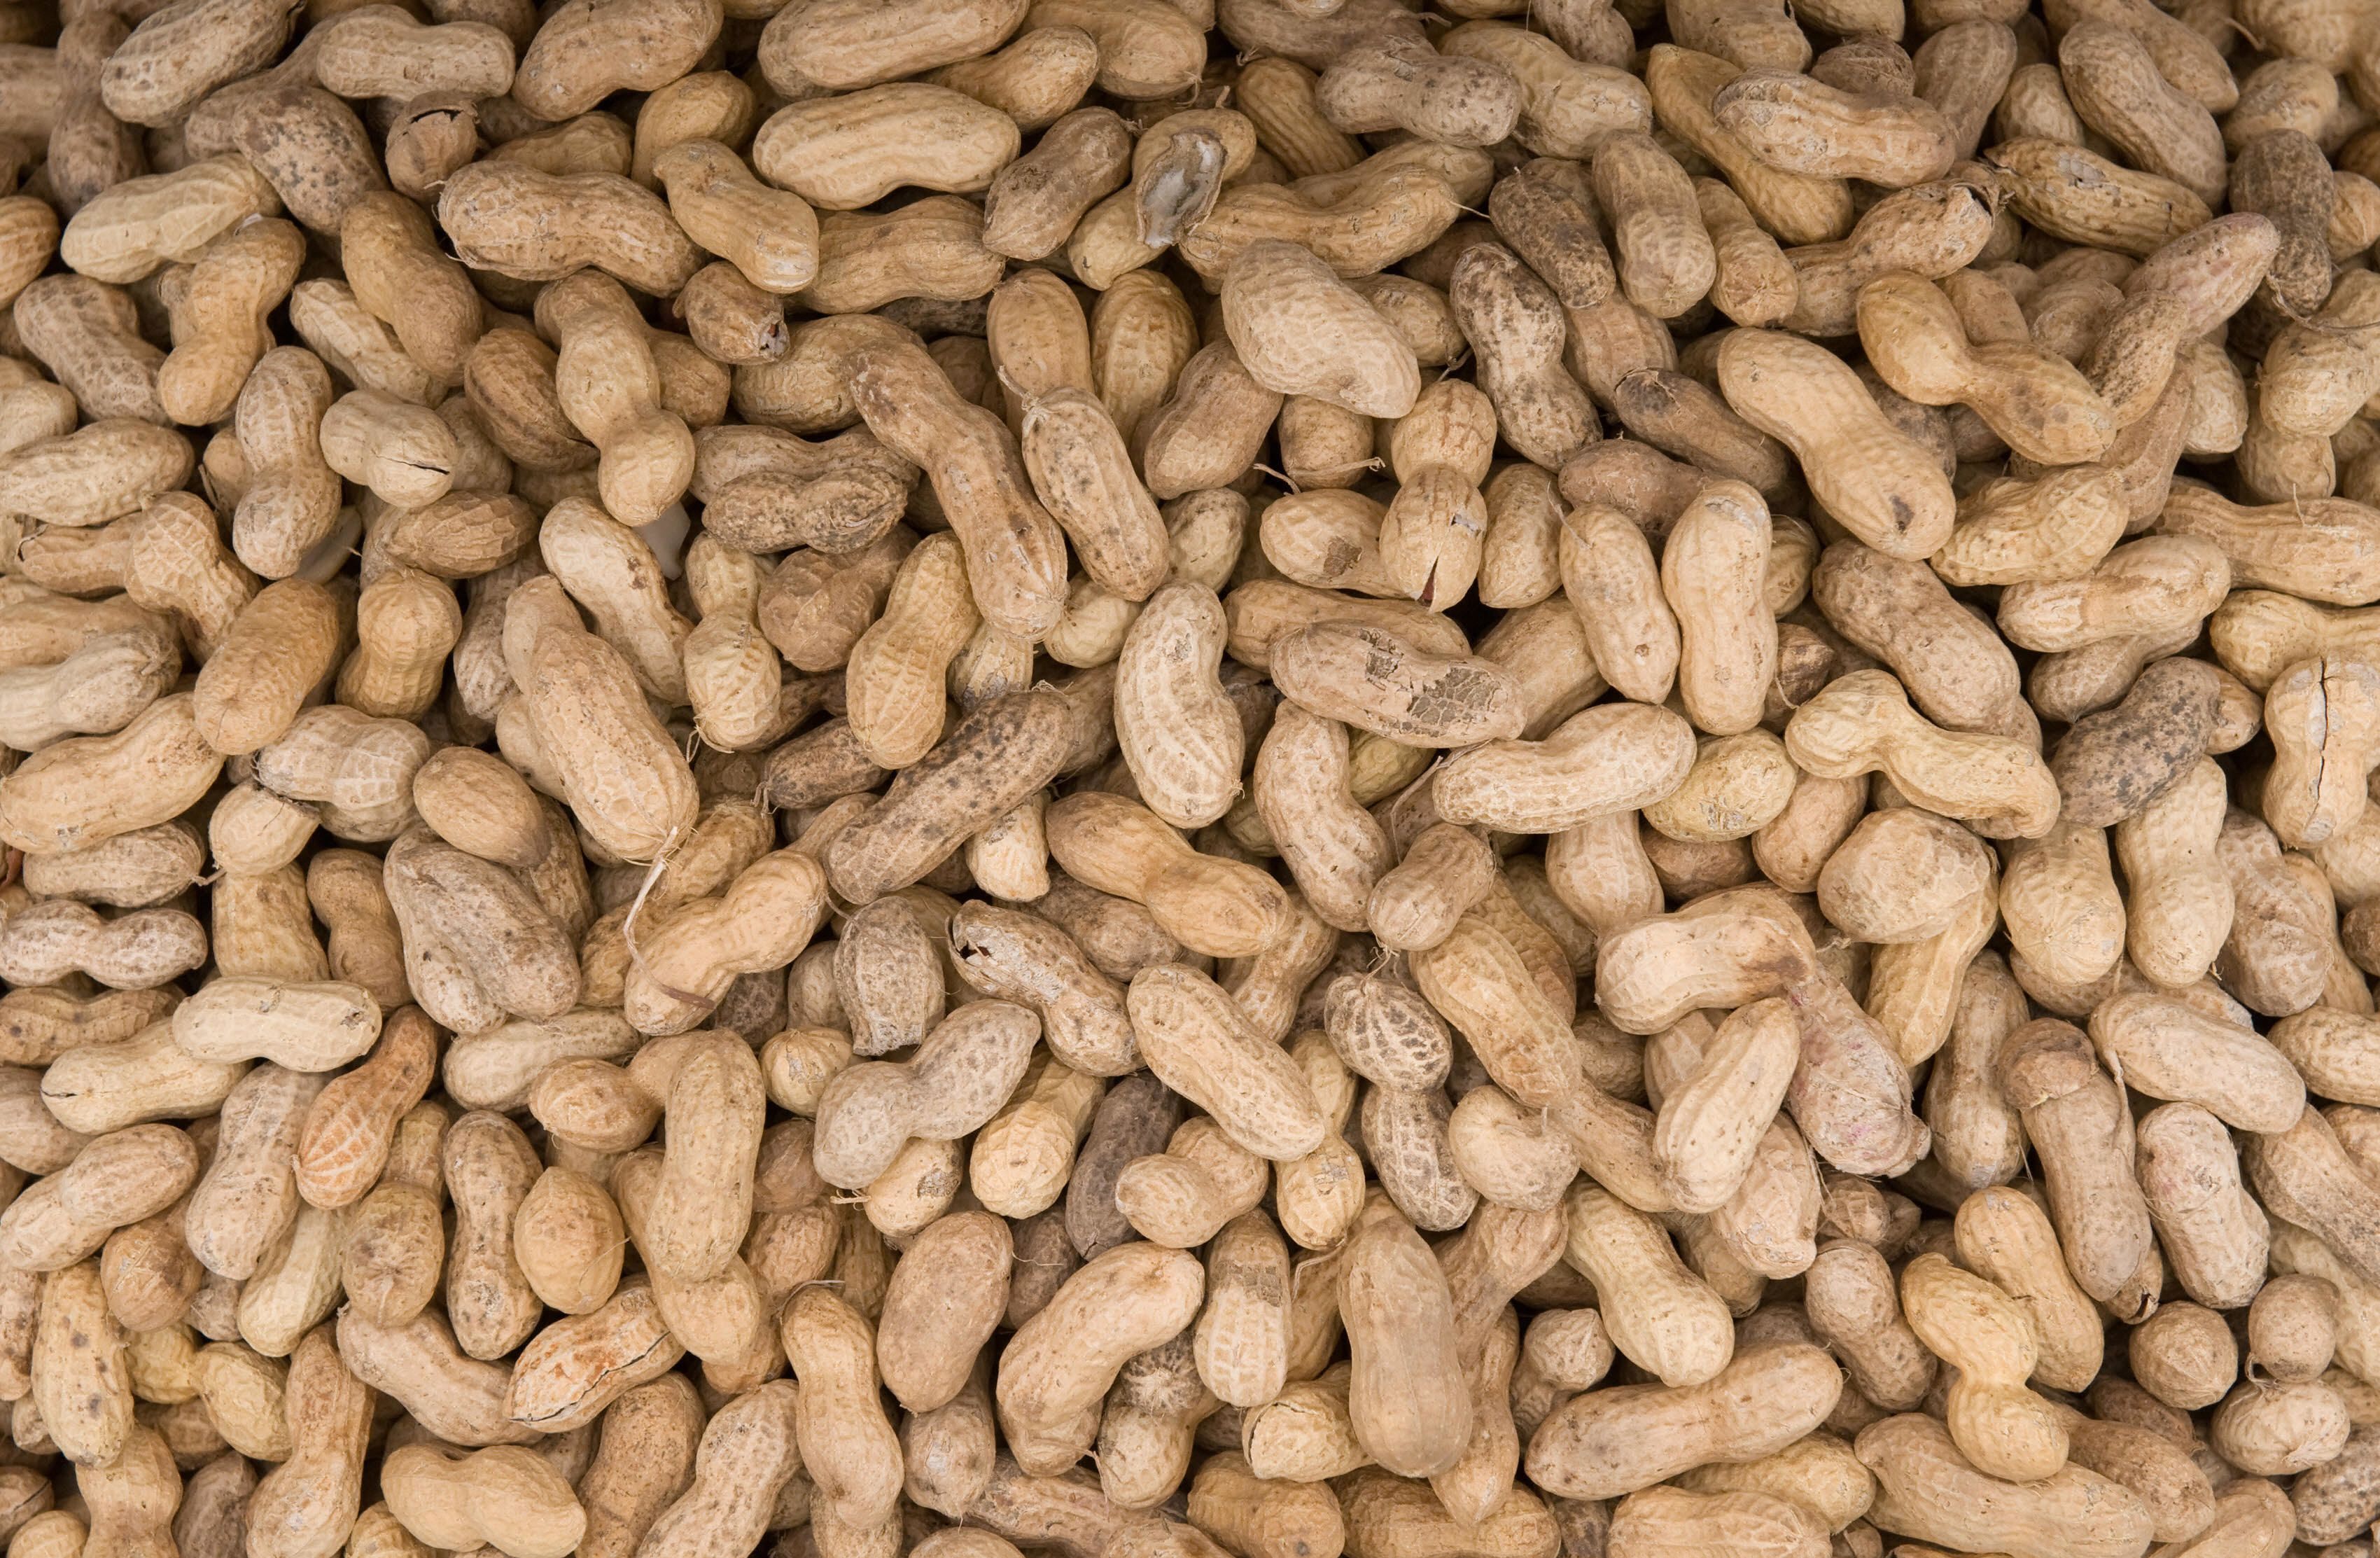 Governments should recommend nuts to pregnant women, says study